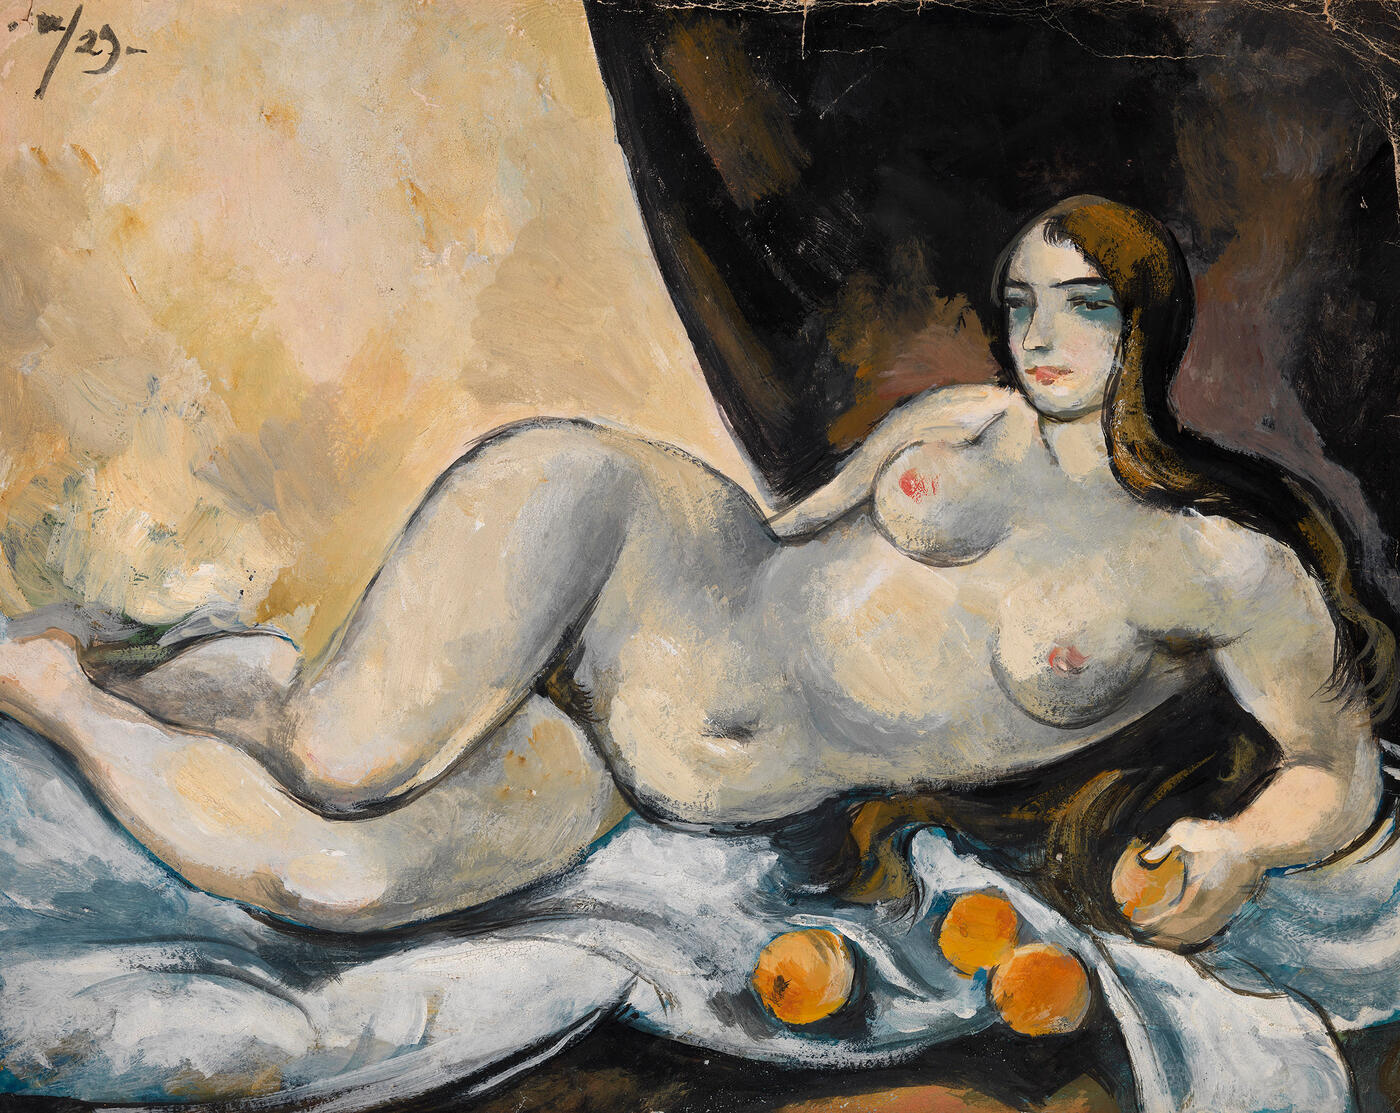 Reclining Nude with Apples